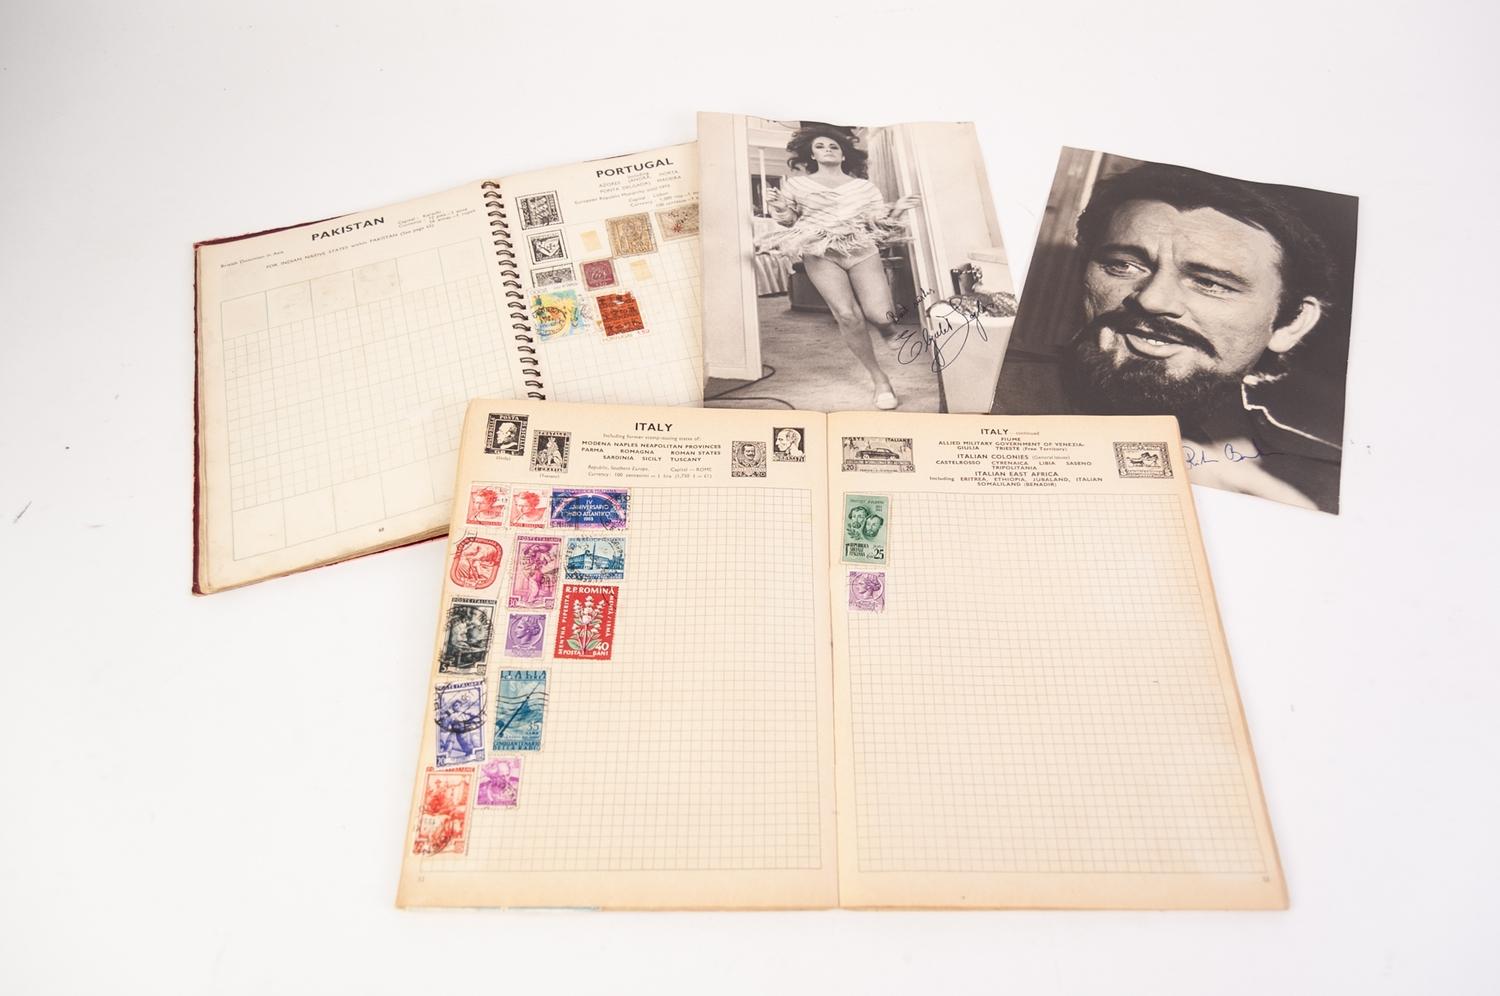 TWO JUNIOR STAMP ALBUMS PLUS PHOTOGRAPHS OF ELIZABETH TAYLOR AND RICHARD BURTON with signatures